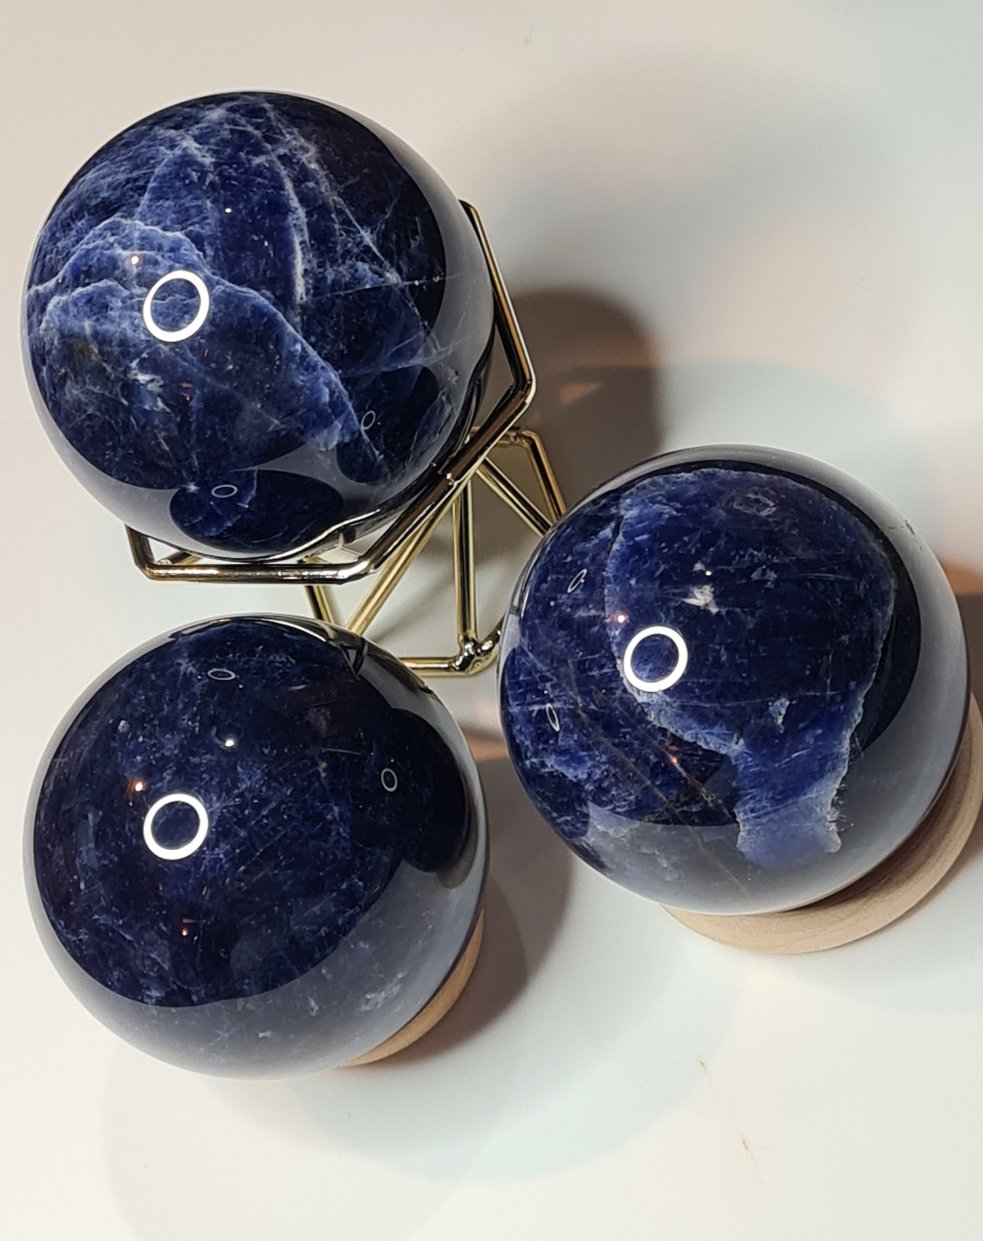 Three Polished Blue Sodalite Spheres, one sitting in a gold coloured metallic wire stand